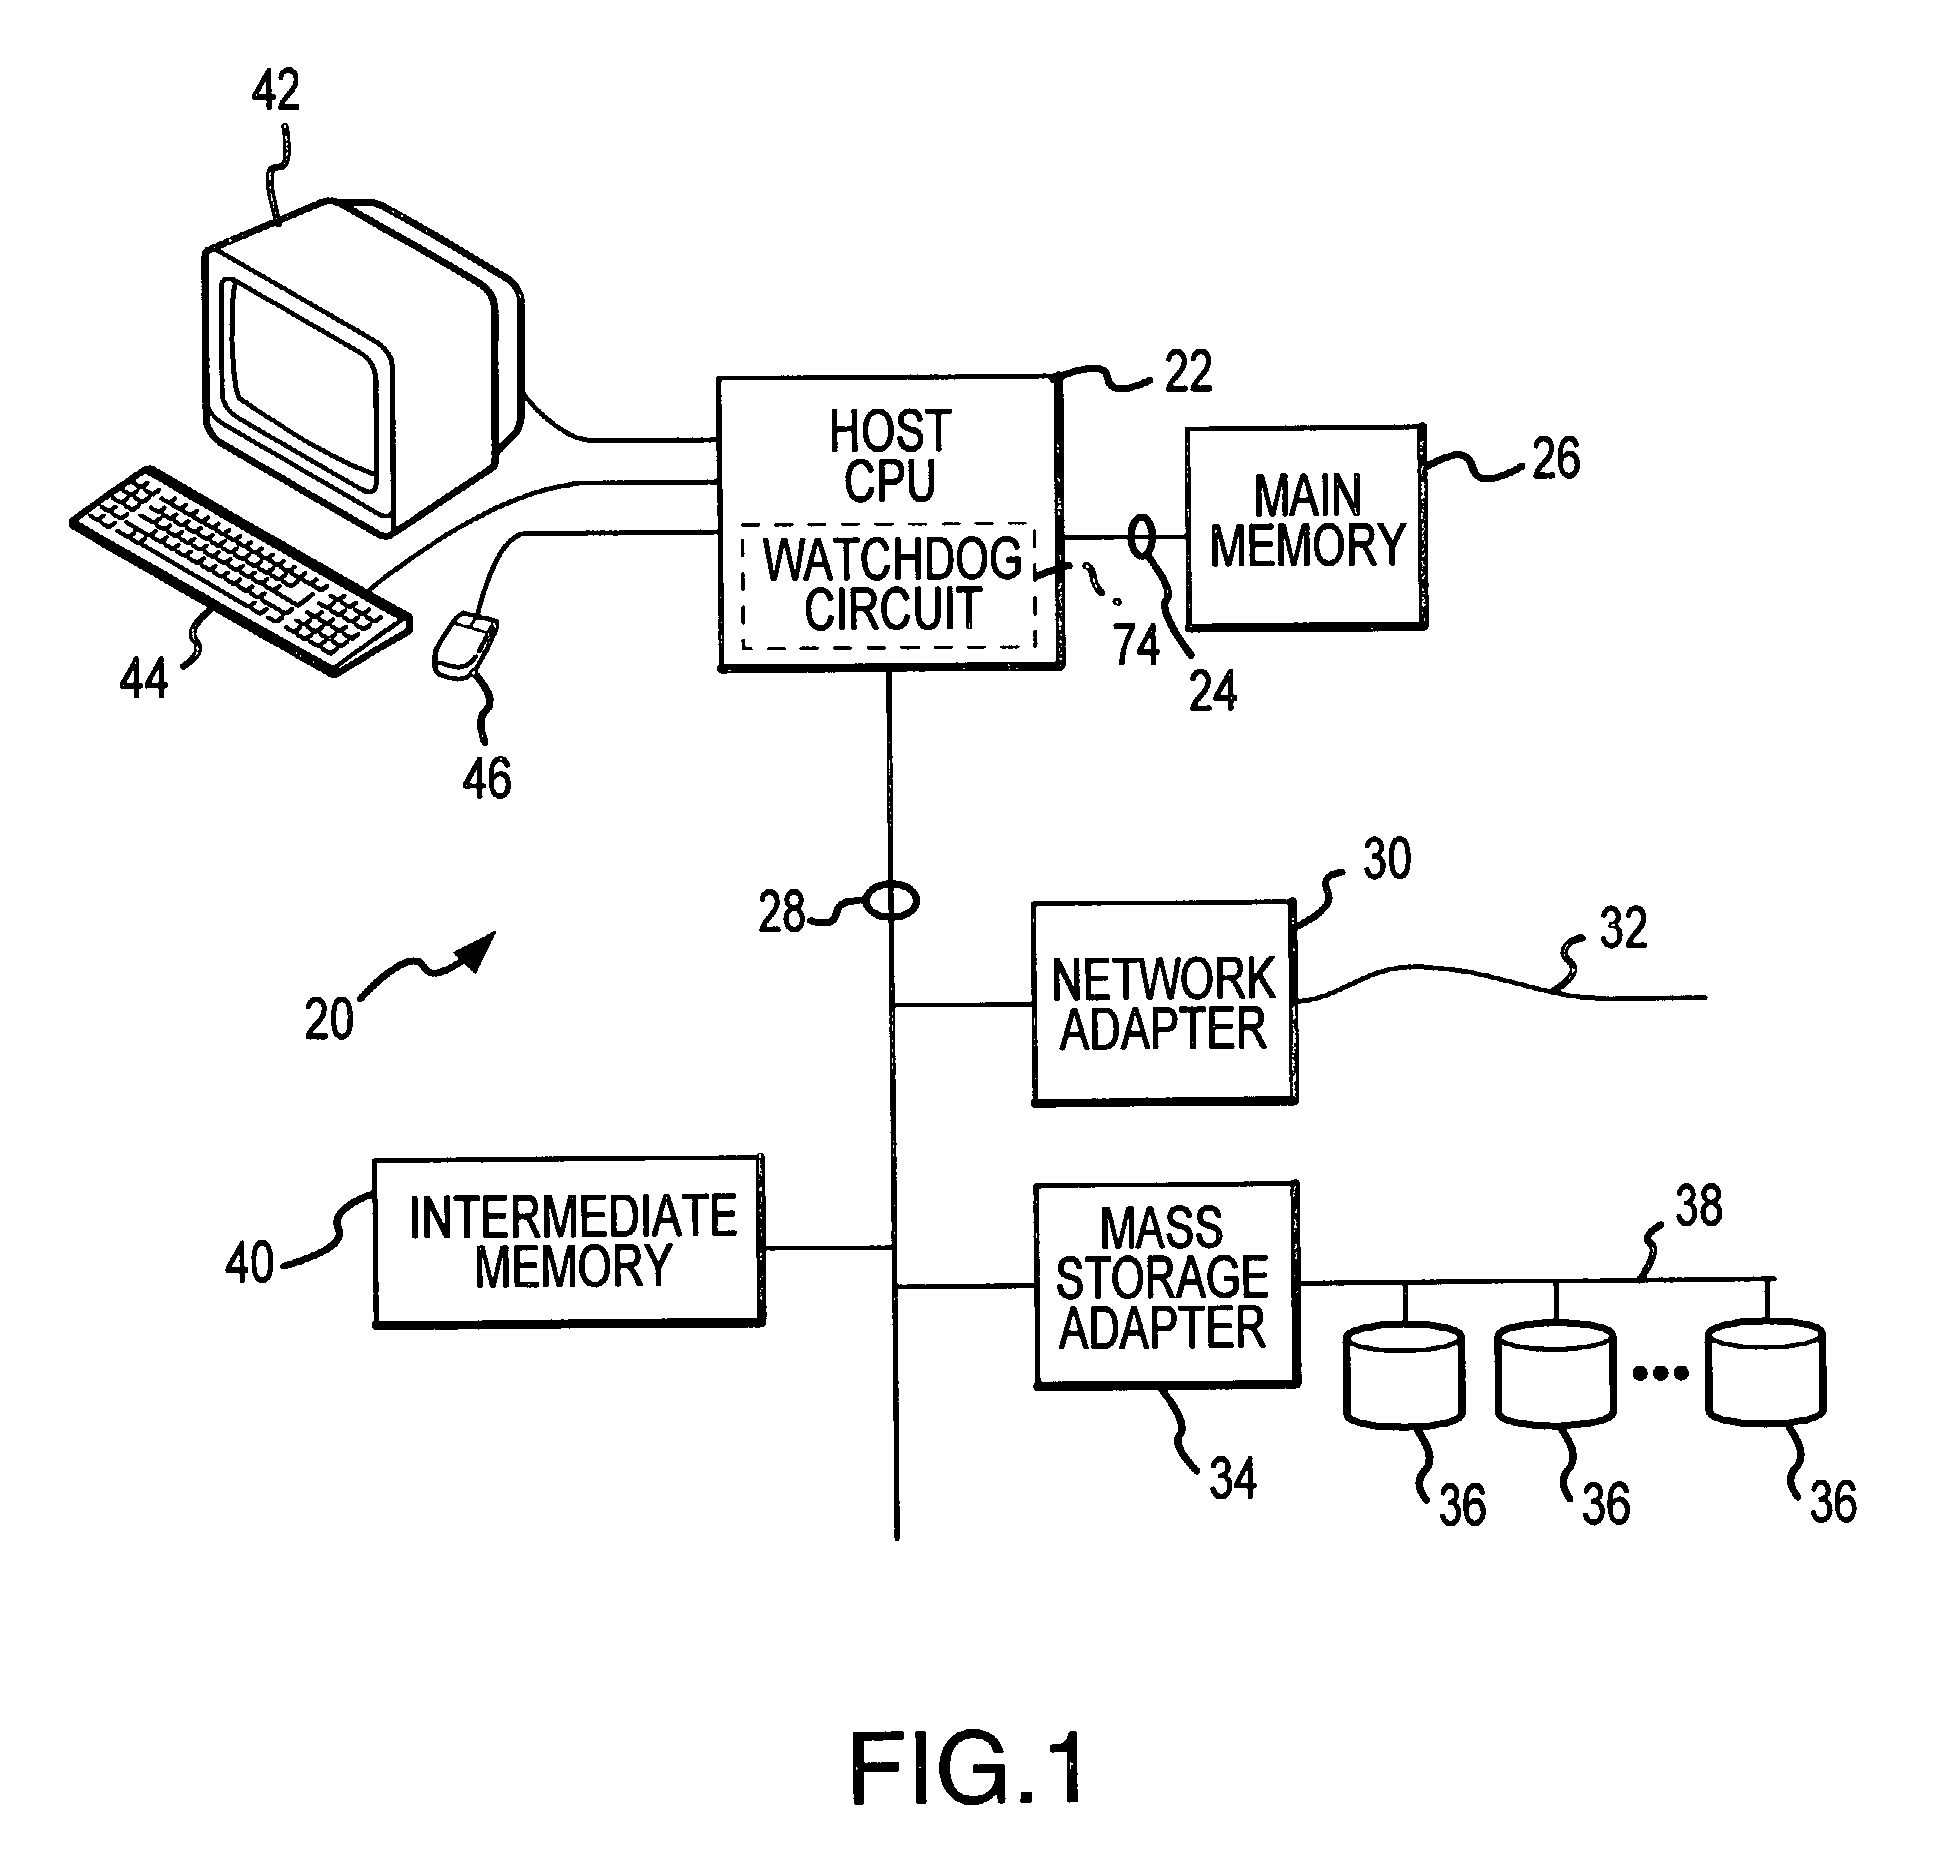 Method and apparatus to establish safe state in a volatile computer memory under multiple hardware and software malfunction conditions